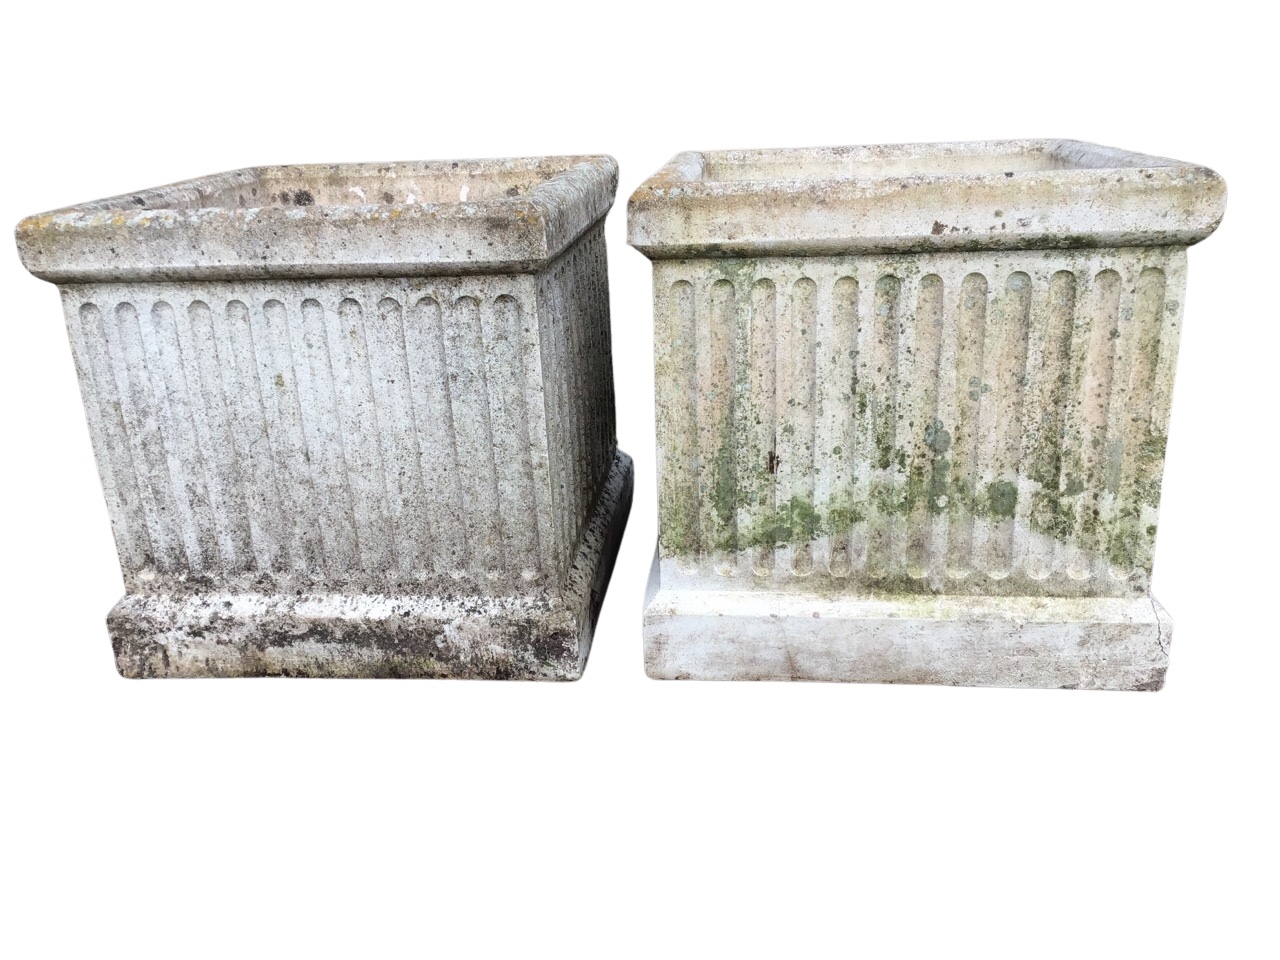 A pair of large square composition stone garden urns with fluted sides and moulded rims. (17.75in